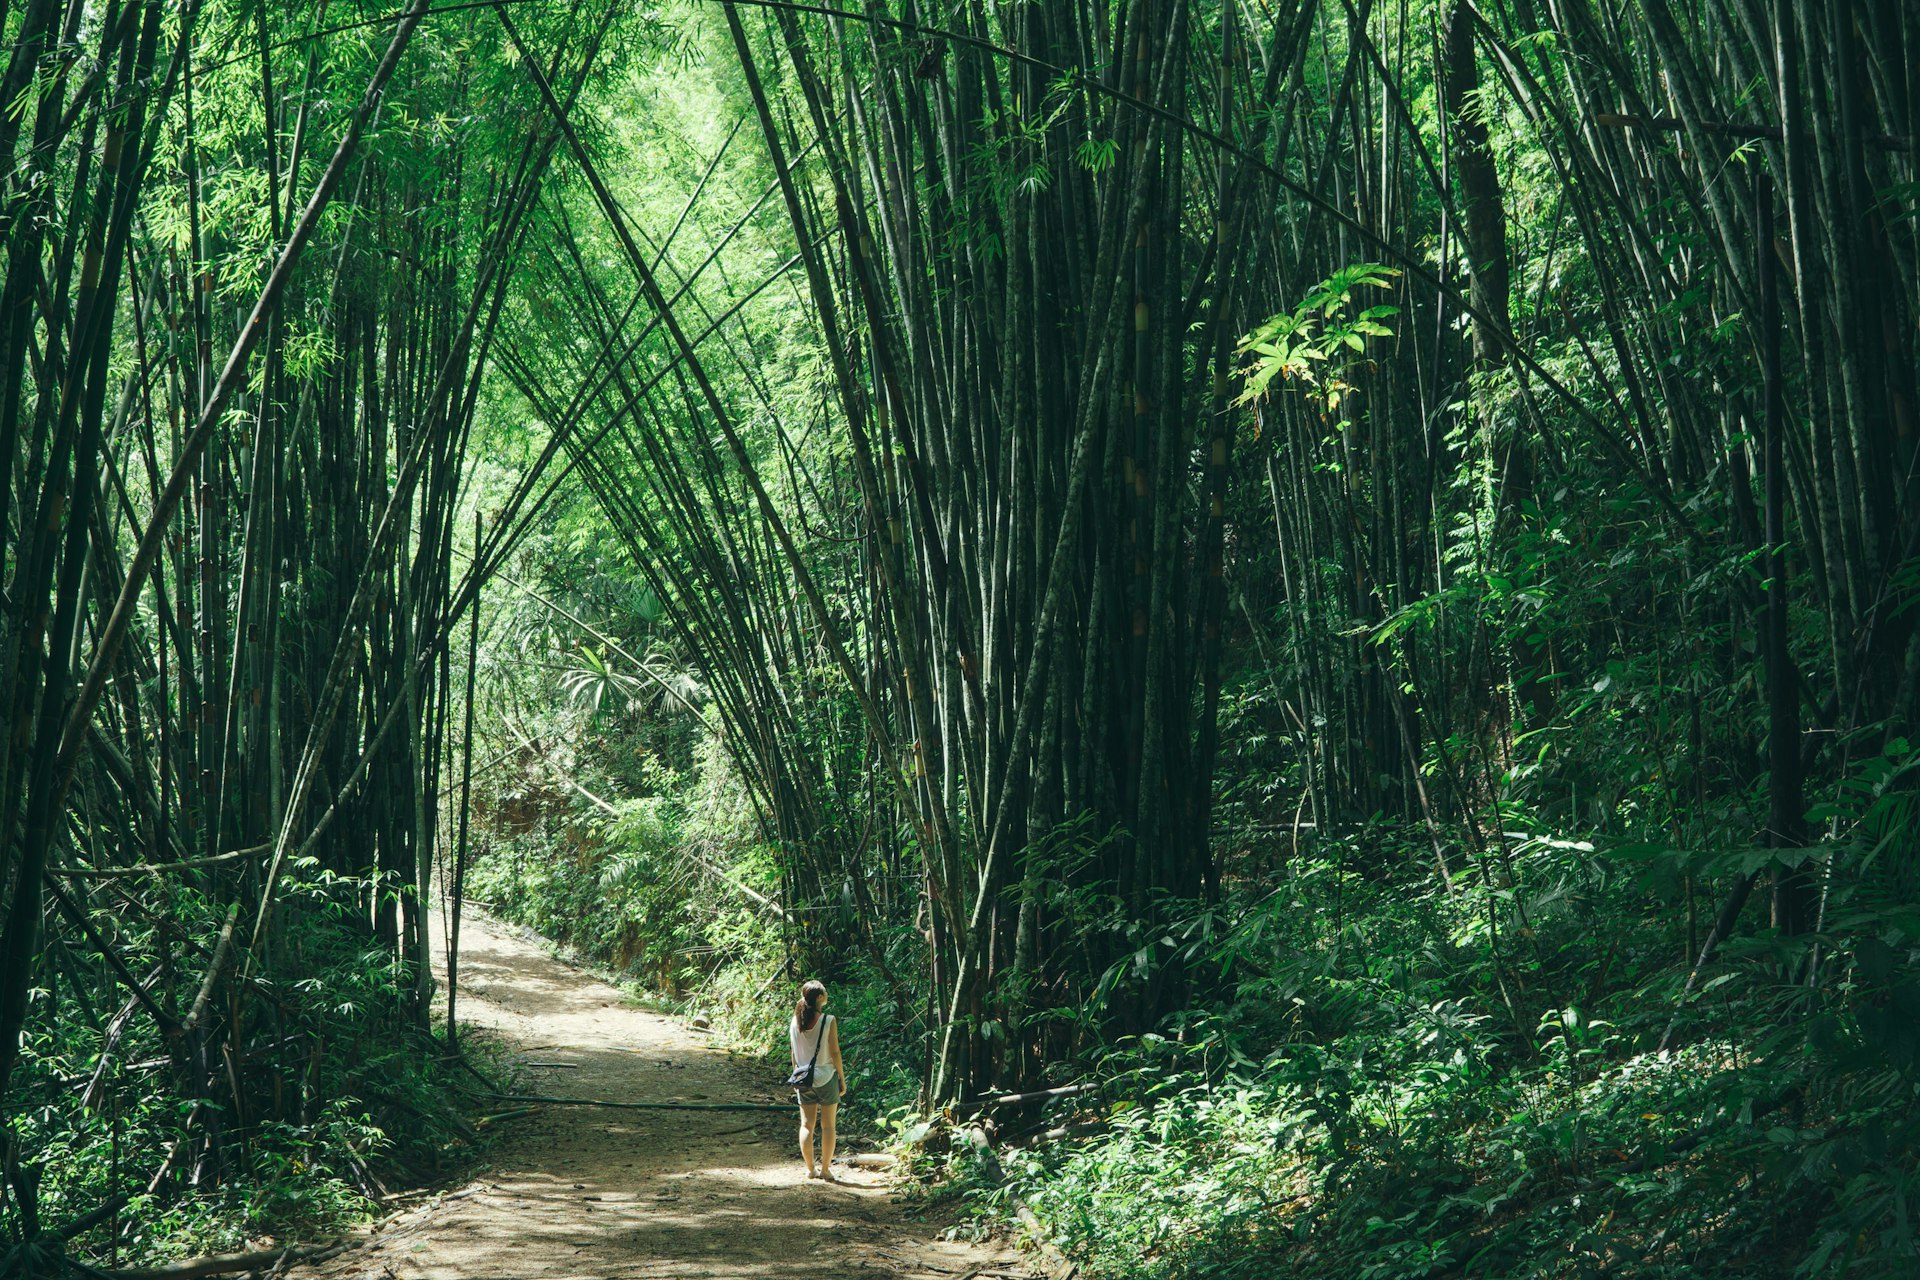 A girl exploring the Bamboo forest in Khao Sok National Park, Thailand.